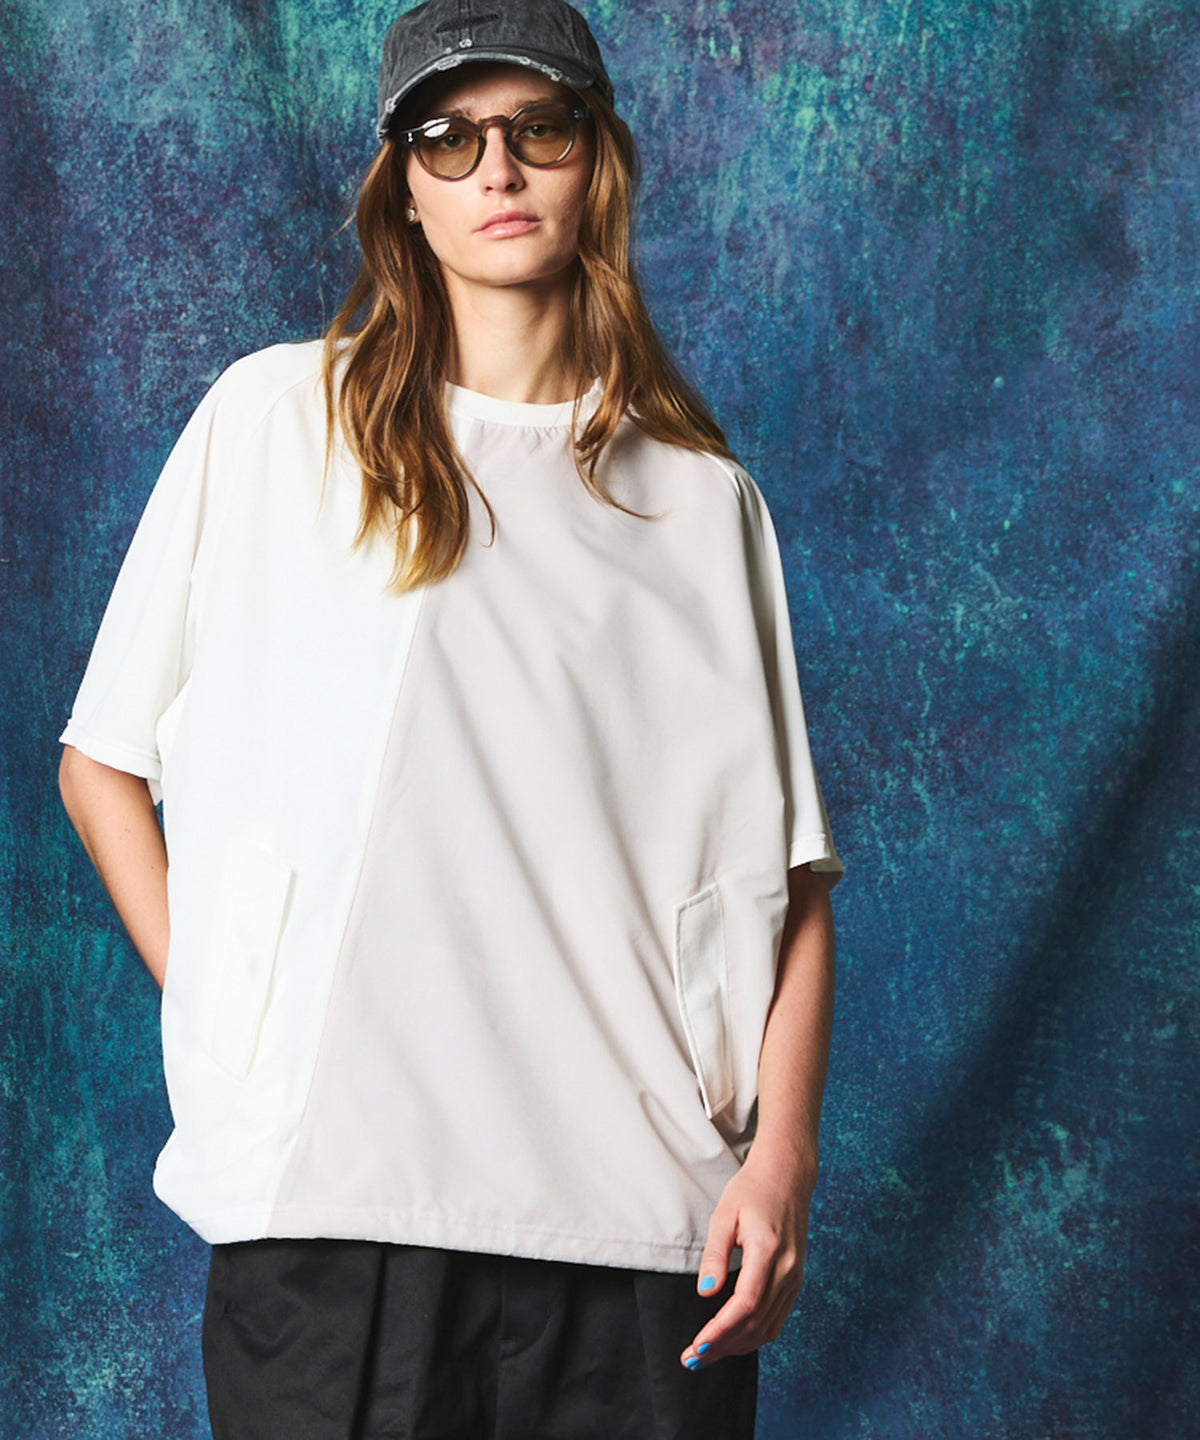 【SPORTS TECH HIGH SPEC LINE】Oversized Different Material Combination Crew Neck Pocket T-shirt